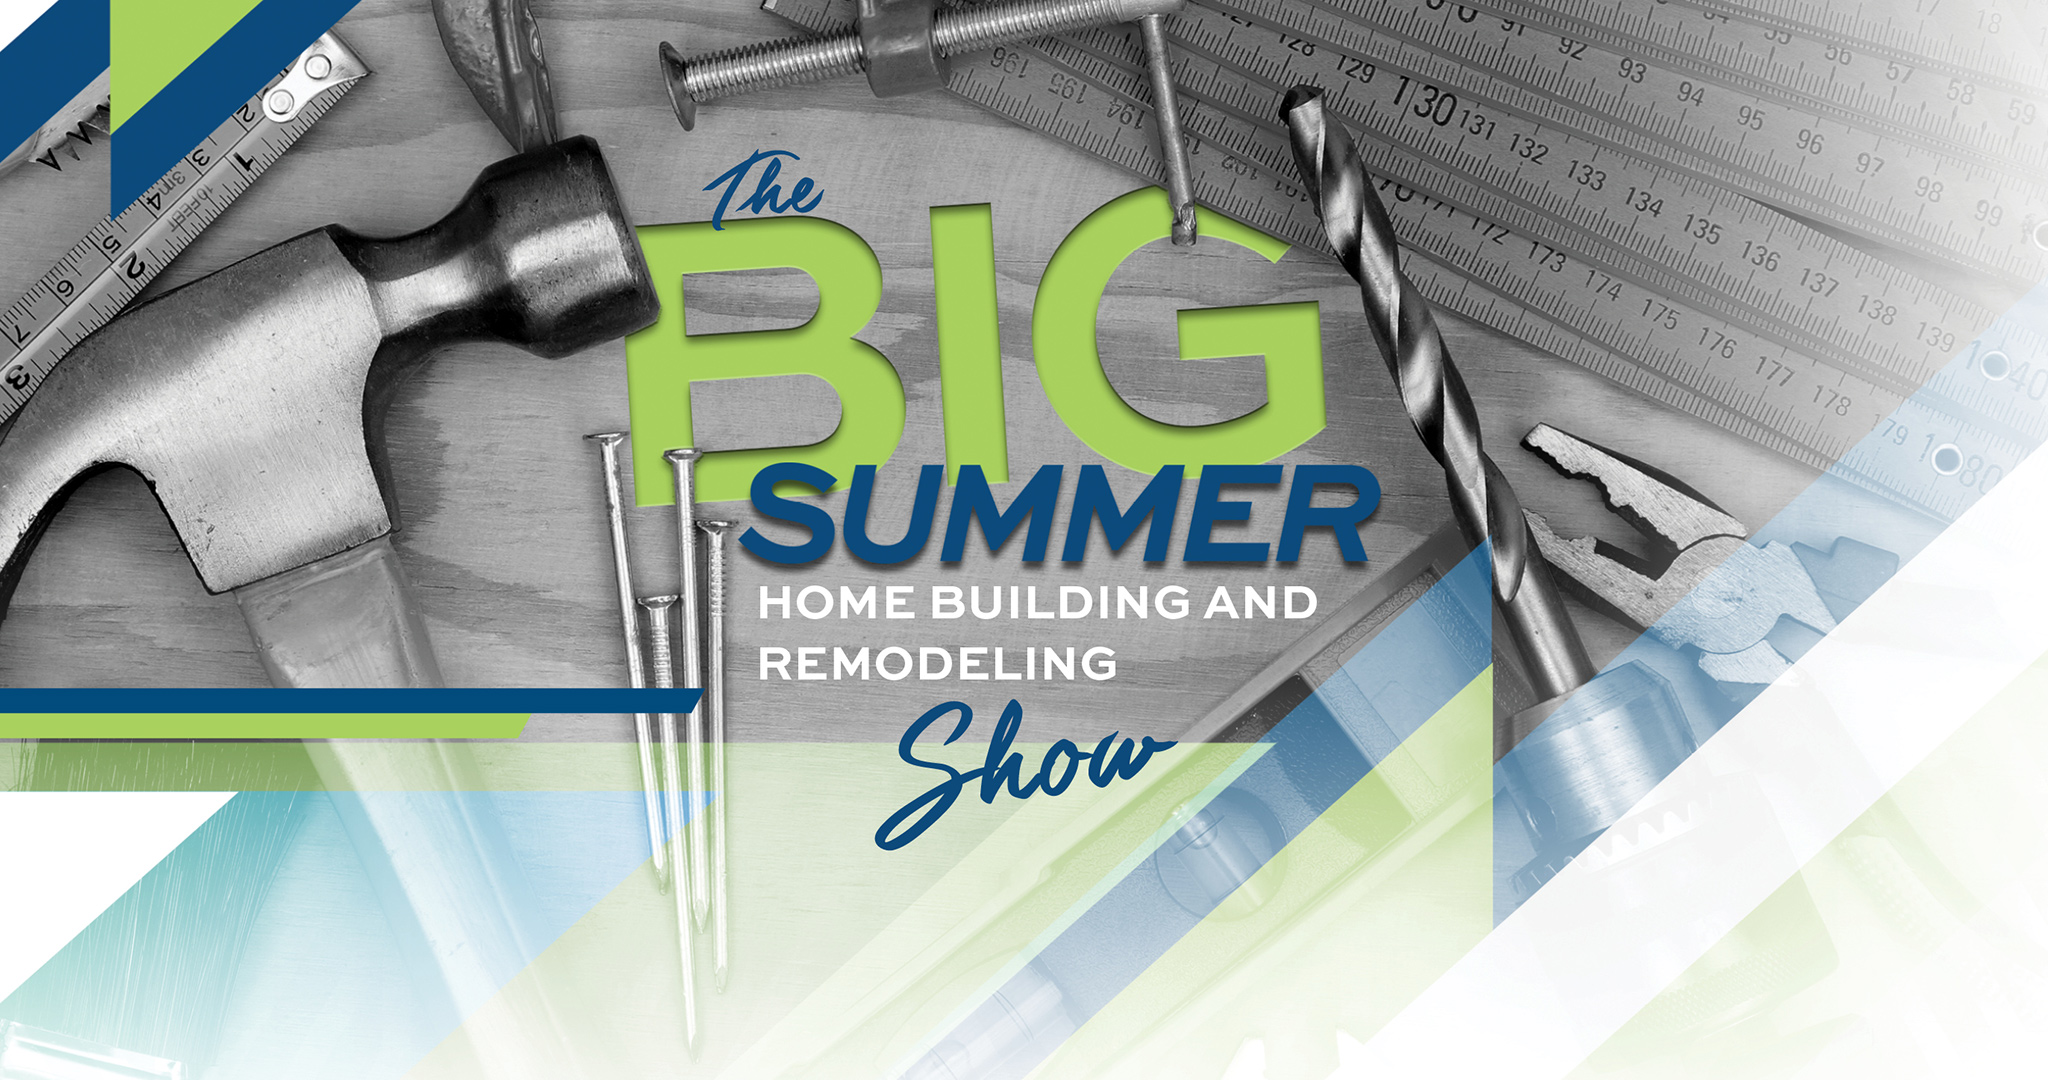 Your Guide to the 2019 Big Summer Home Building & Remodeling Show